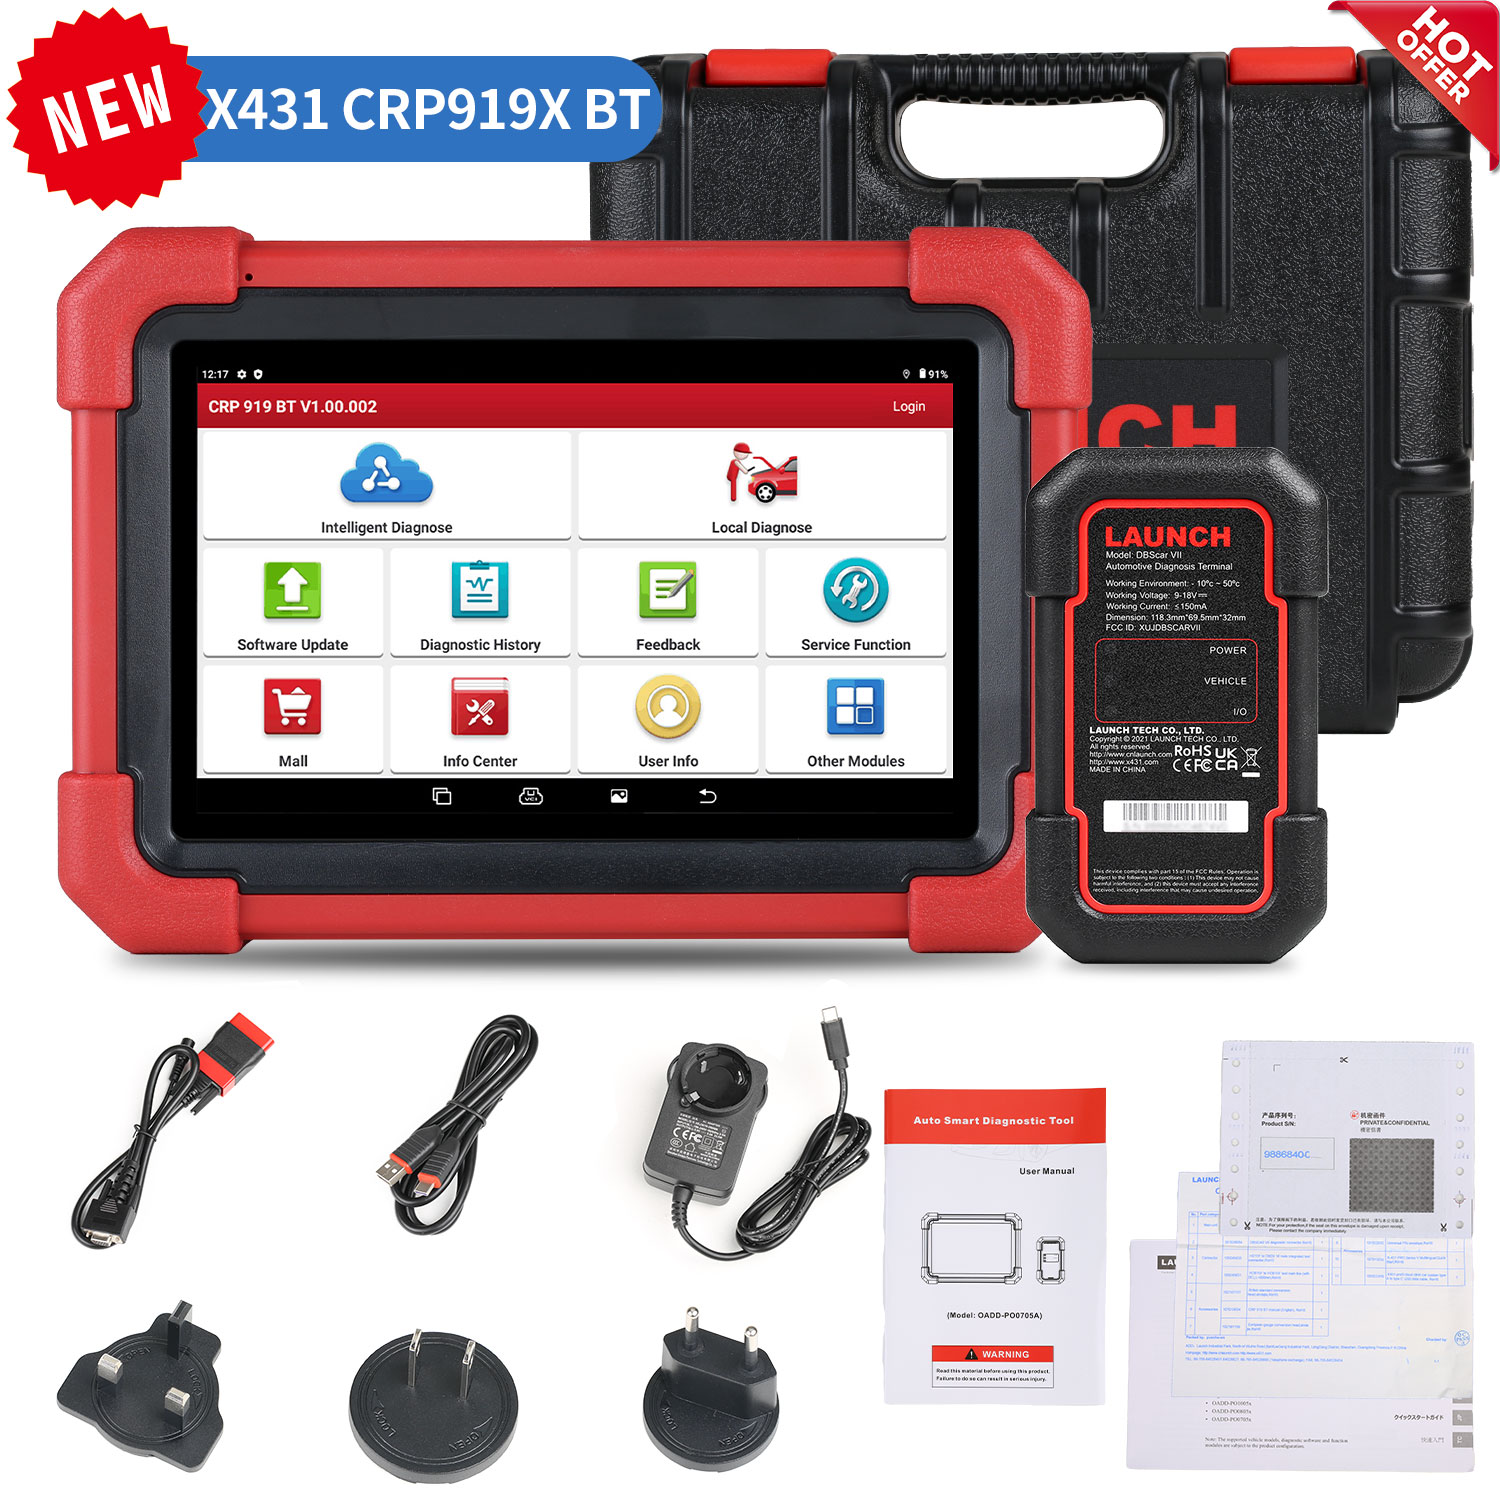 Launch X431 CRP919X : New Diagnostic Tool with Powerful Features